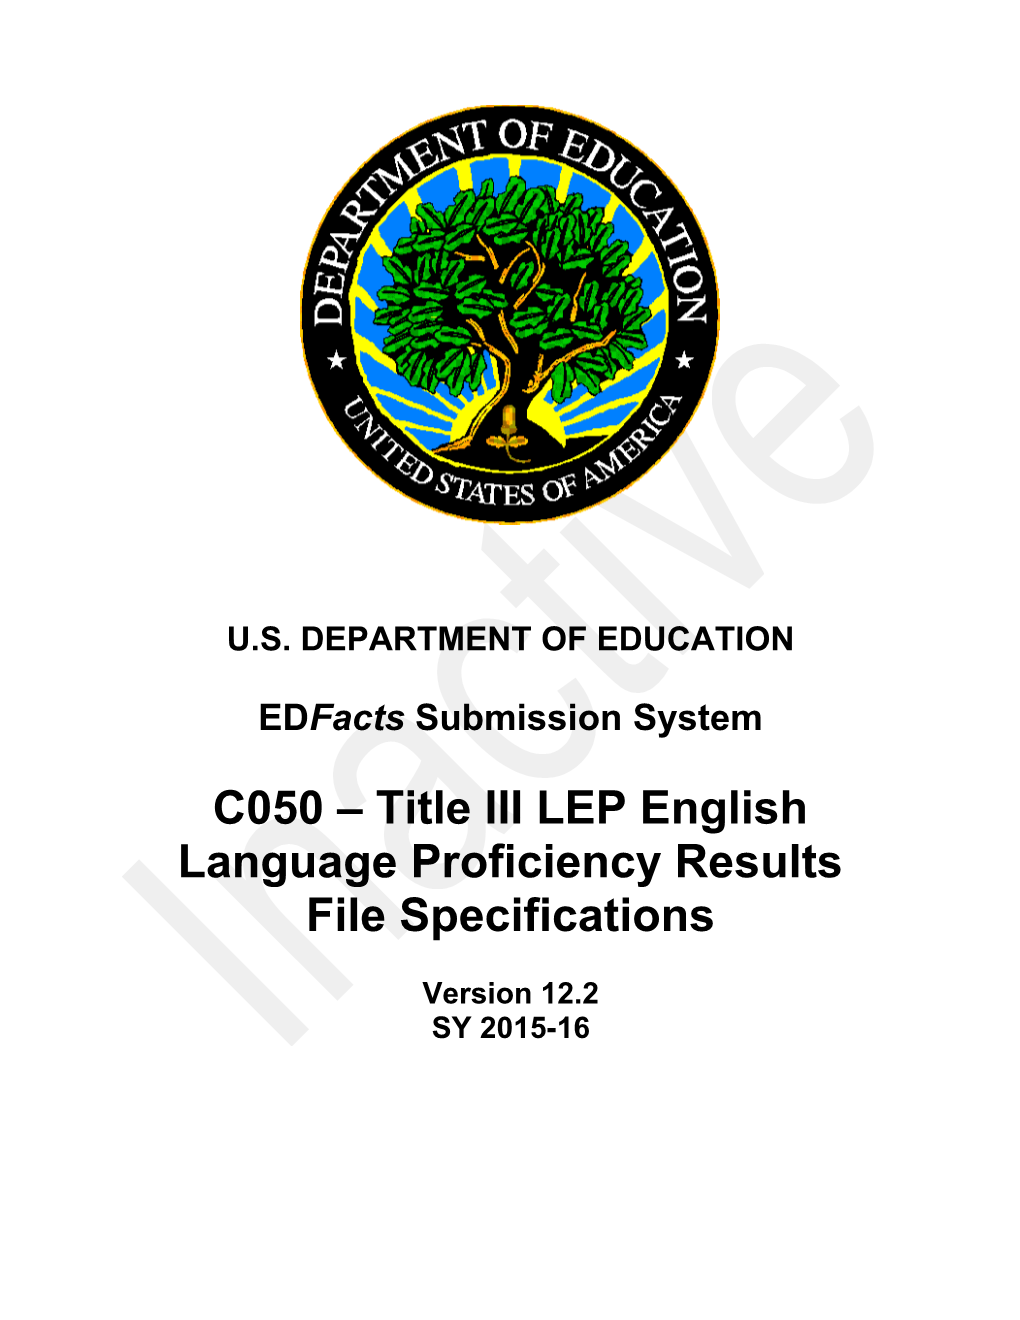 Title III Limited English Proficiency (LEP) English Language Proficiency Results File